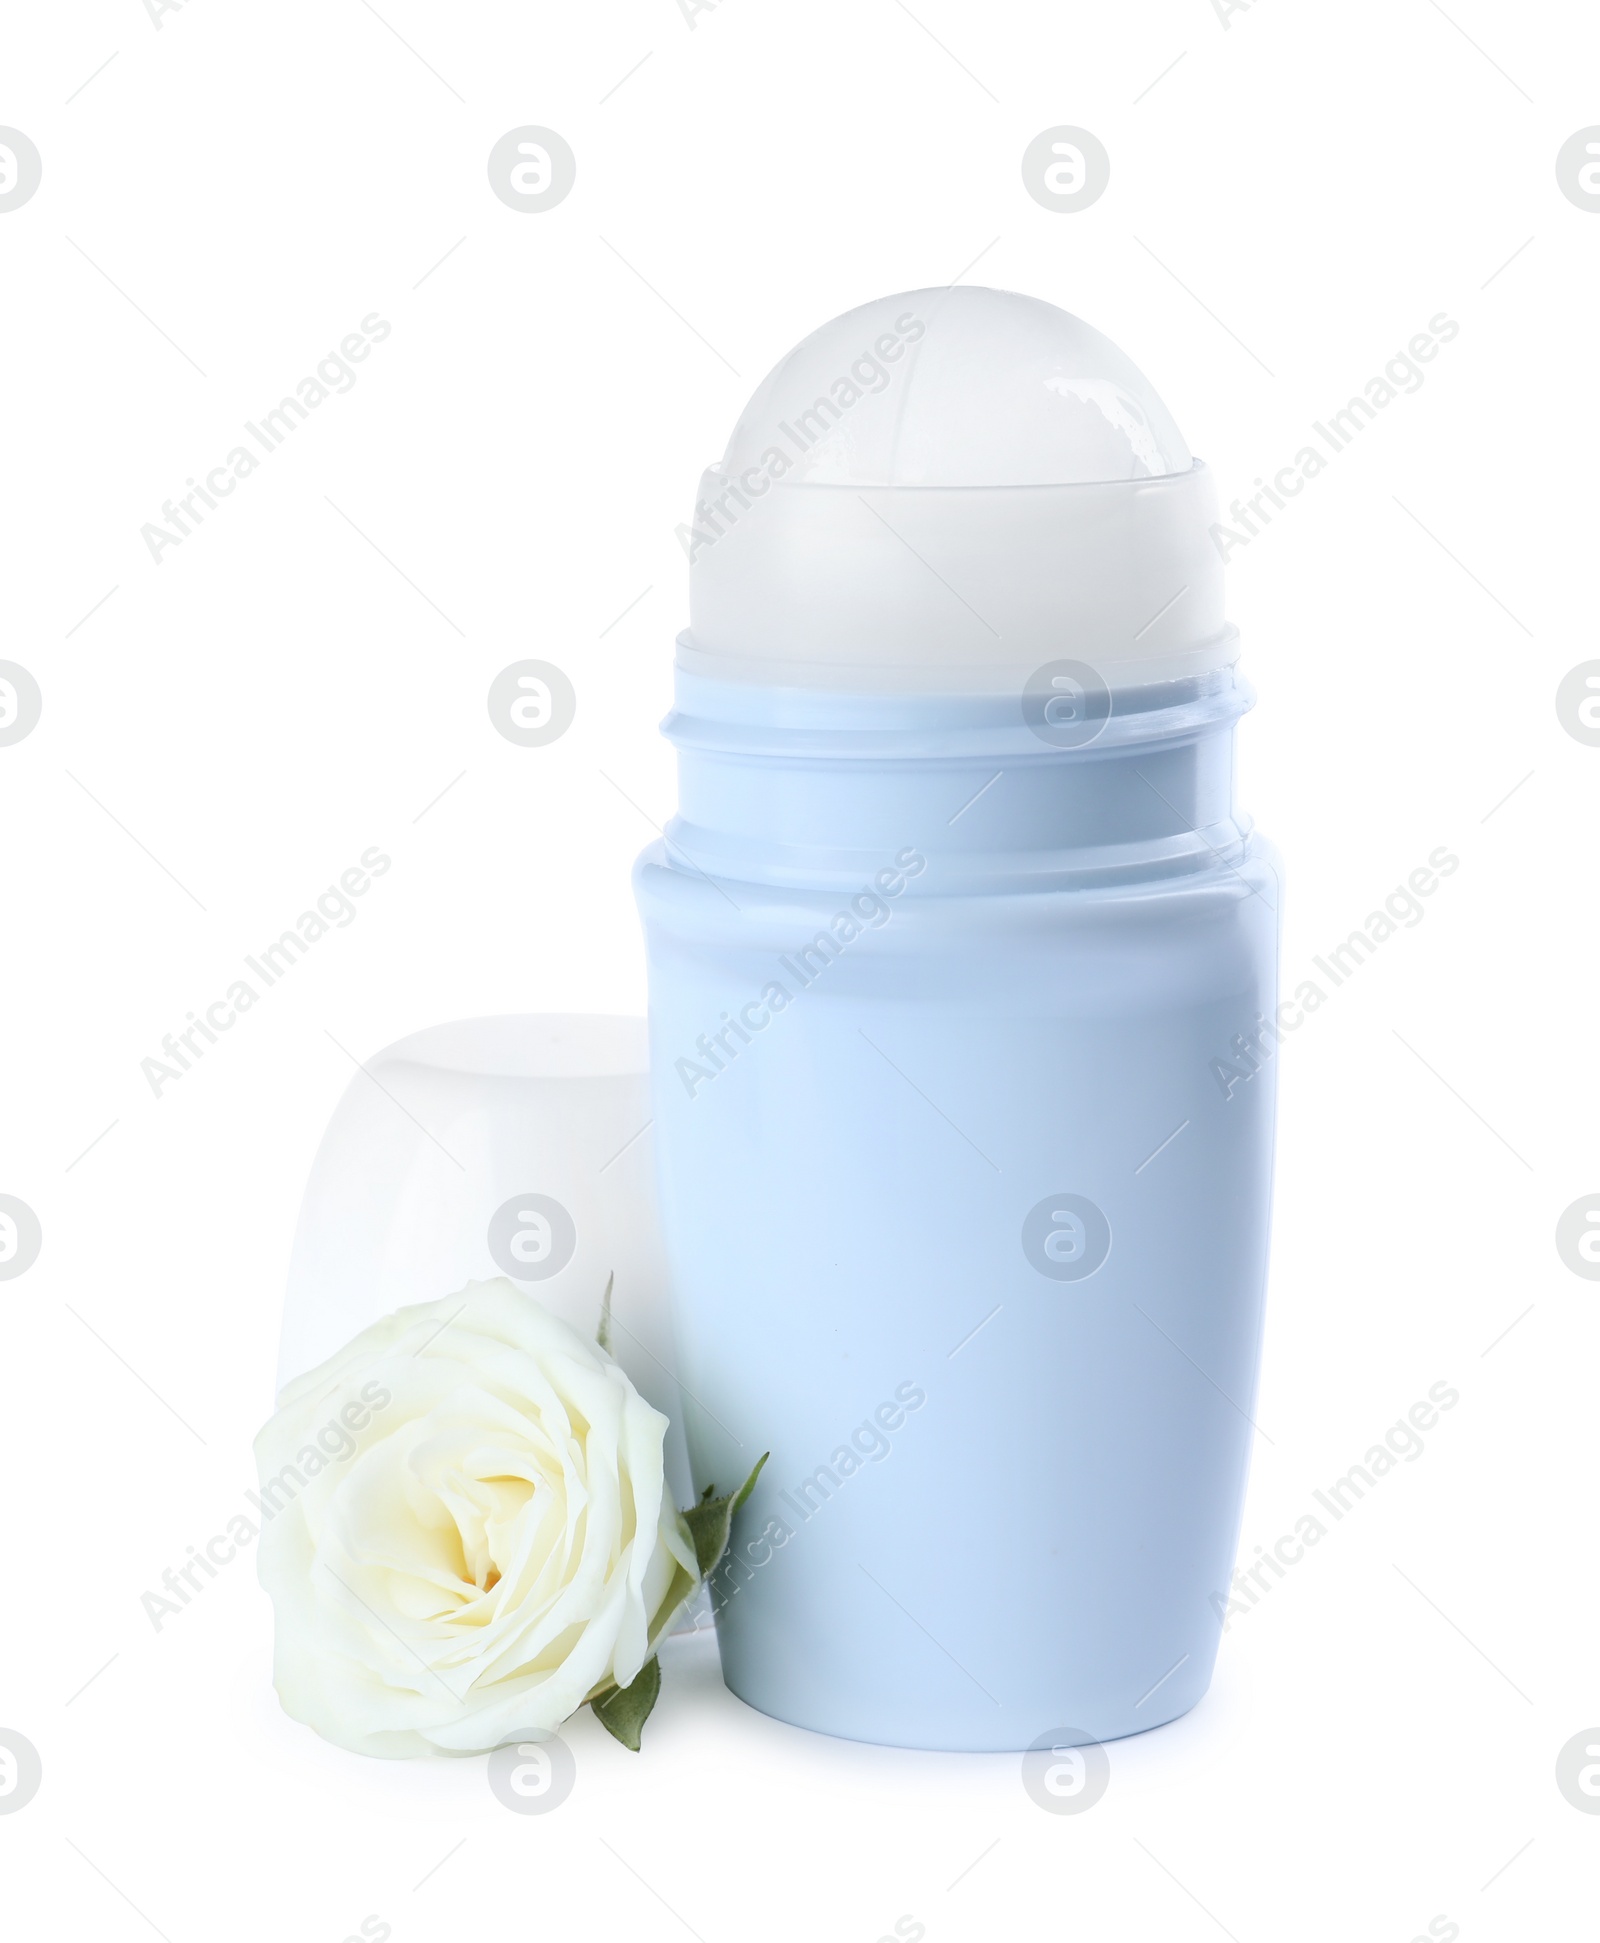 Photo of Roll-on female deodorant with rose on white background. Skin care